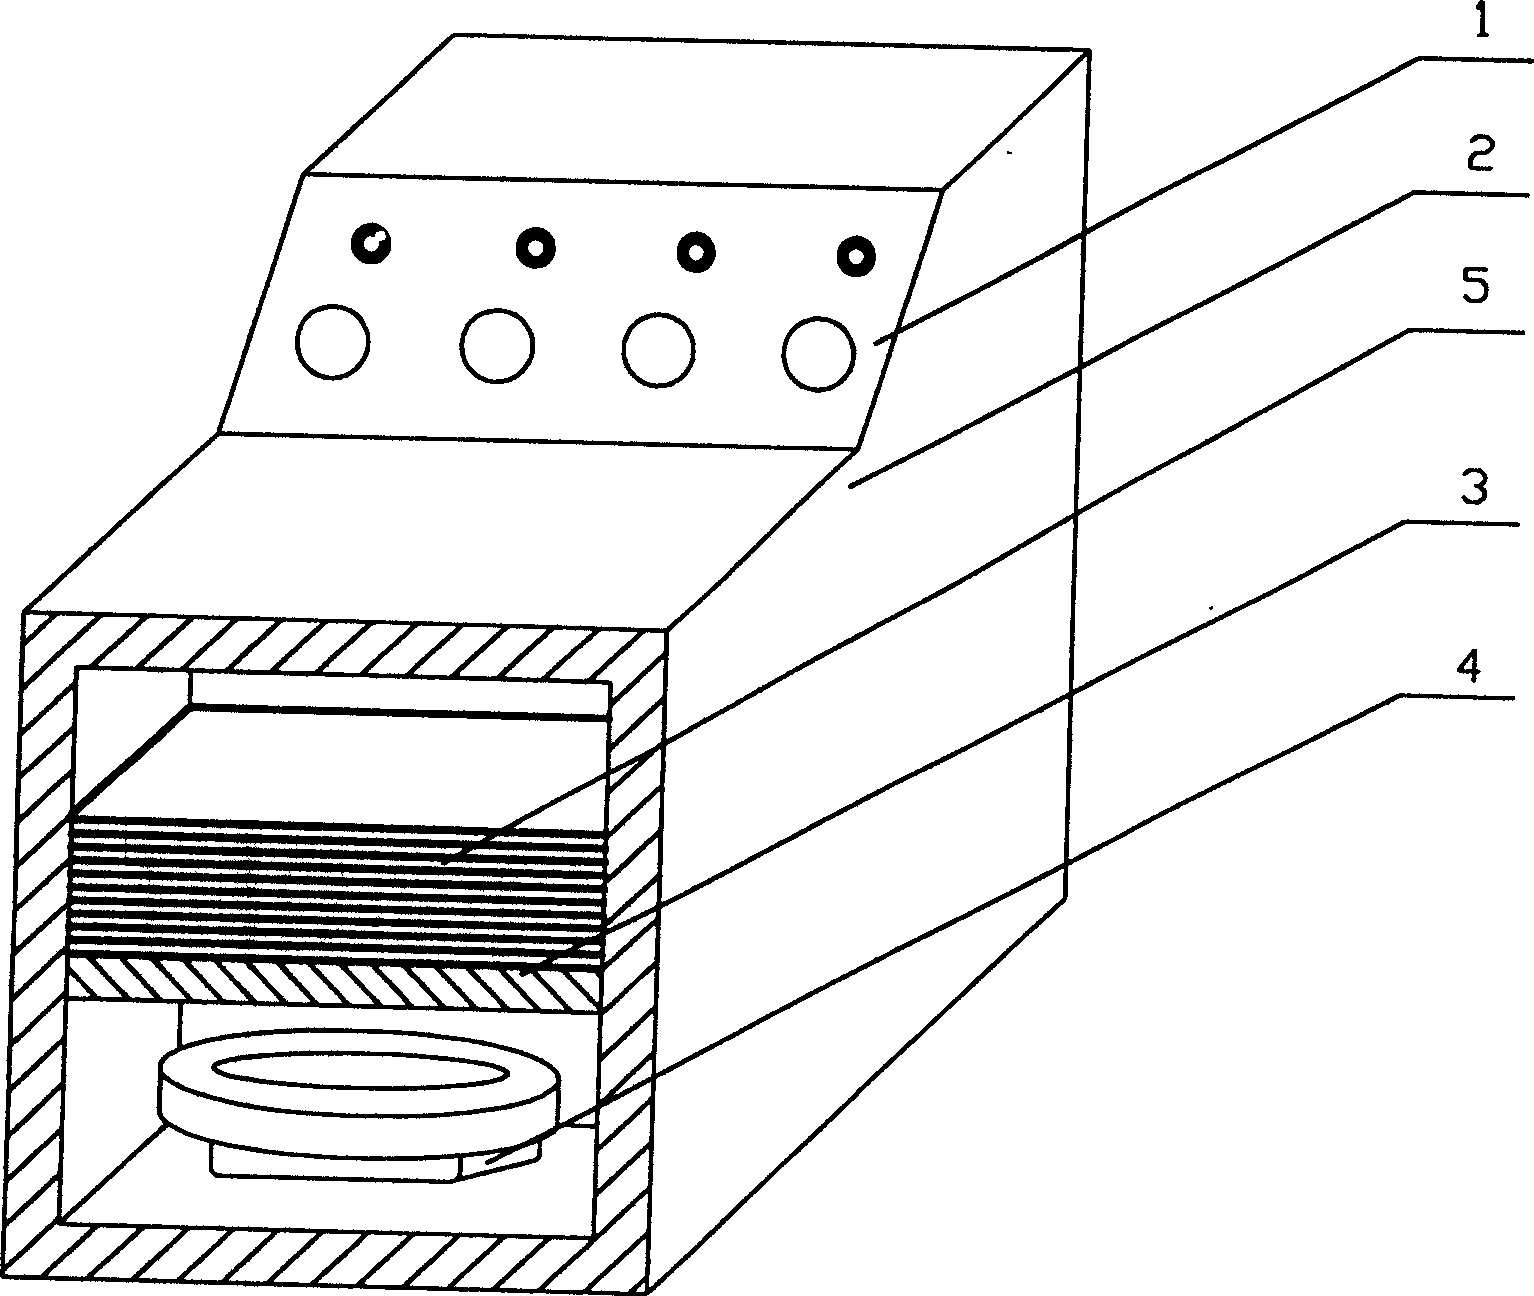 Process for the separation of paper-plastic composite material